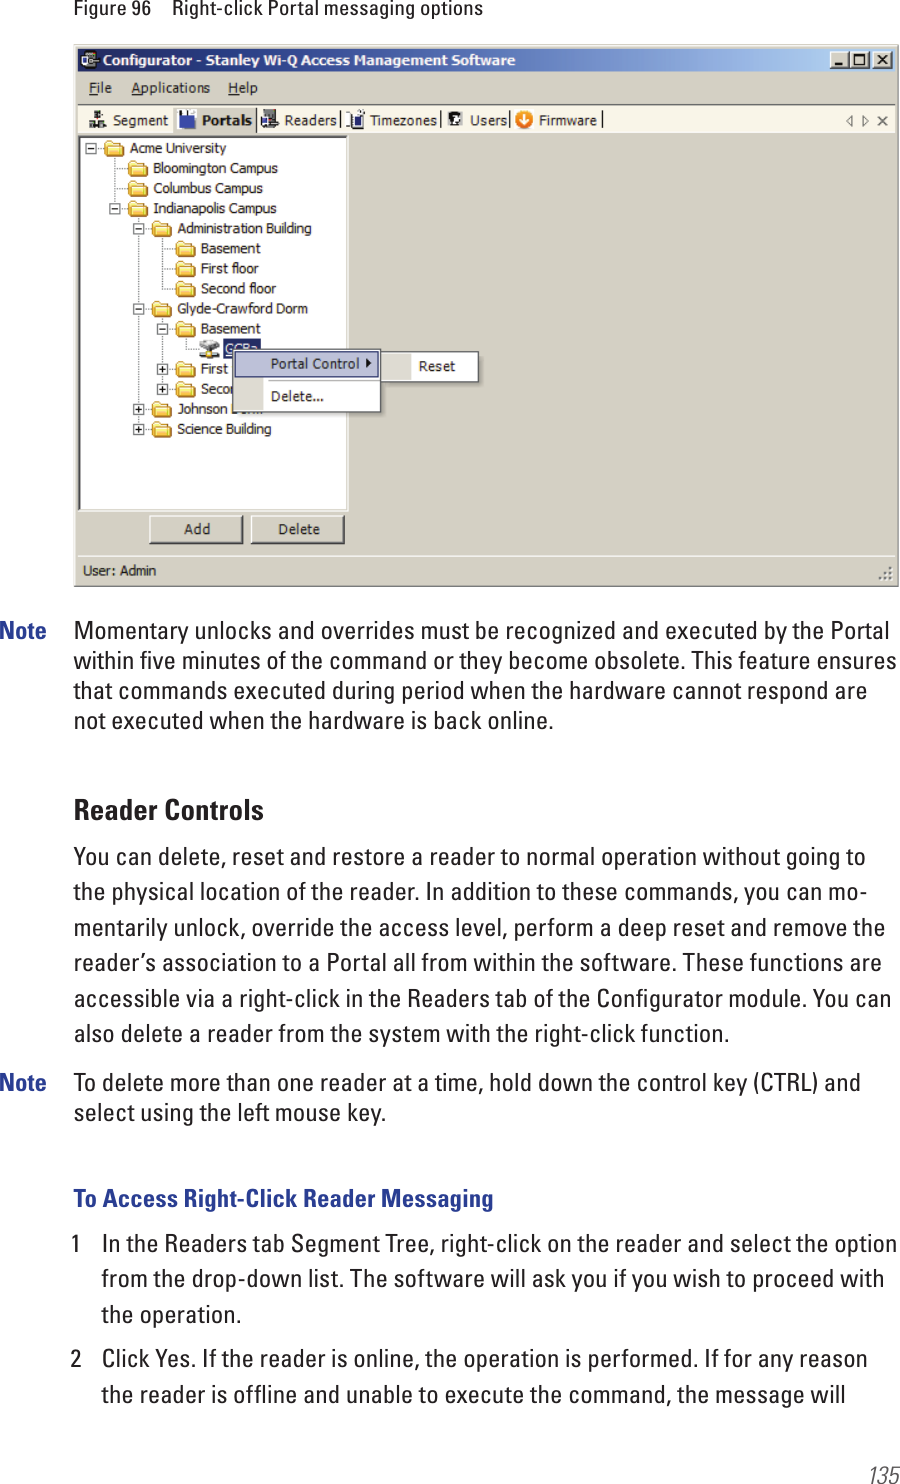 135Figure 96  Right-click Portal messaging optionsNote  Momentary unlocks and overrides must be recognized and executed by the Portal within ﬁve minutes of the command or they become obsolete. This feature ensures that commands executed during period when the hardware cannot respond are not executed when the hardware is back online.Reader ControlsYou can delete, reset and restore a reader to normal operation without going to the physical location of the reader. In addition to these commands, you can mo-mentarily unlock, override the access level, perform a deep reset and remove the reader’s association to a Portal all from within the software. These functions are accessible via a right-click in the Readers tab of the Conﬁgurator module. You can also delete a reader from the system with the right-click function.Note  To delete more than one reader at a time, hold down the control key (CTRL) and select using the left mouse key.To Access Right-Click Reader Messaging1  In the Readers tab Segment Tree, right-click on the reader and select the option from the drop-down list. The software will ask you if you wish to proceed with the operation. 2  Click Yes. If the reader is online, the operation is performed. If for any reason the reader is ofﬂine and unable to execute the command, the message will 